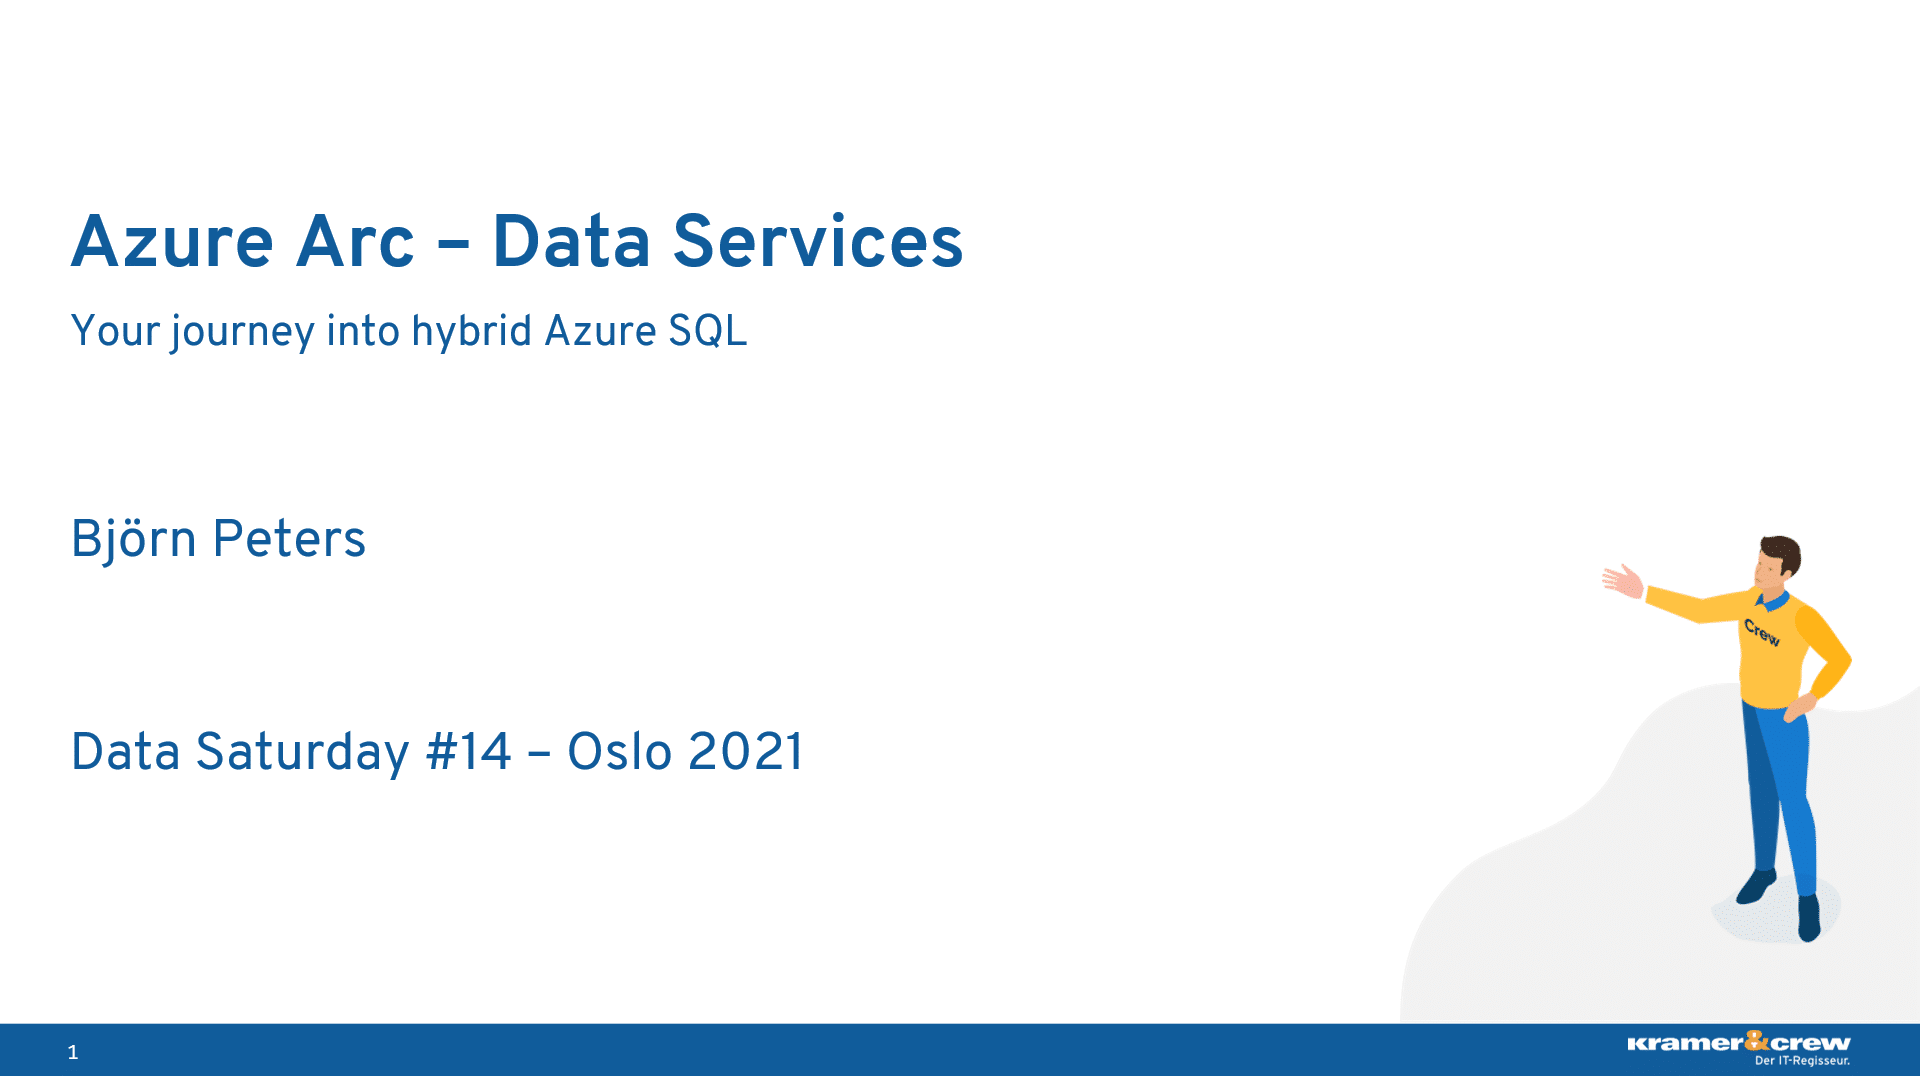 Data Saturday #14 – Oslo 2021 – Introduction into Azure Arc Data Services